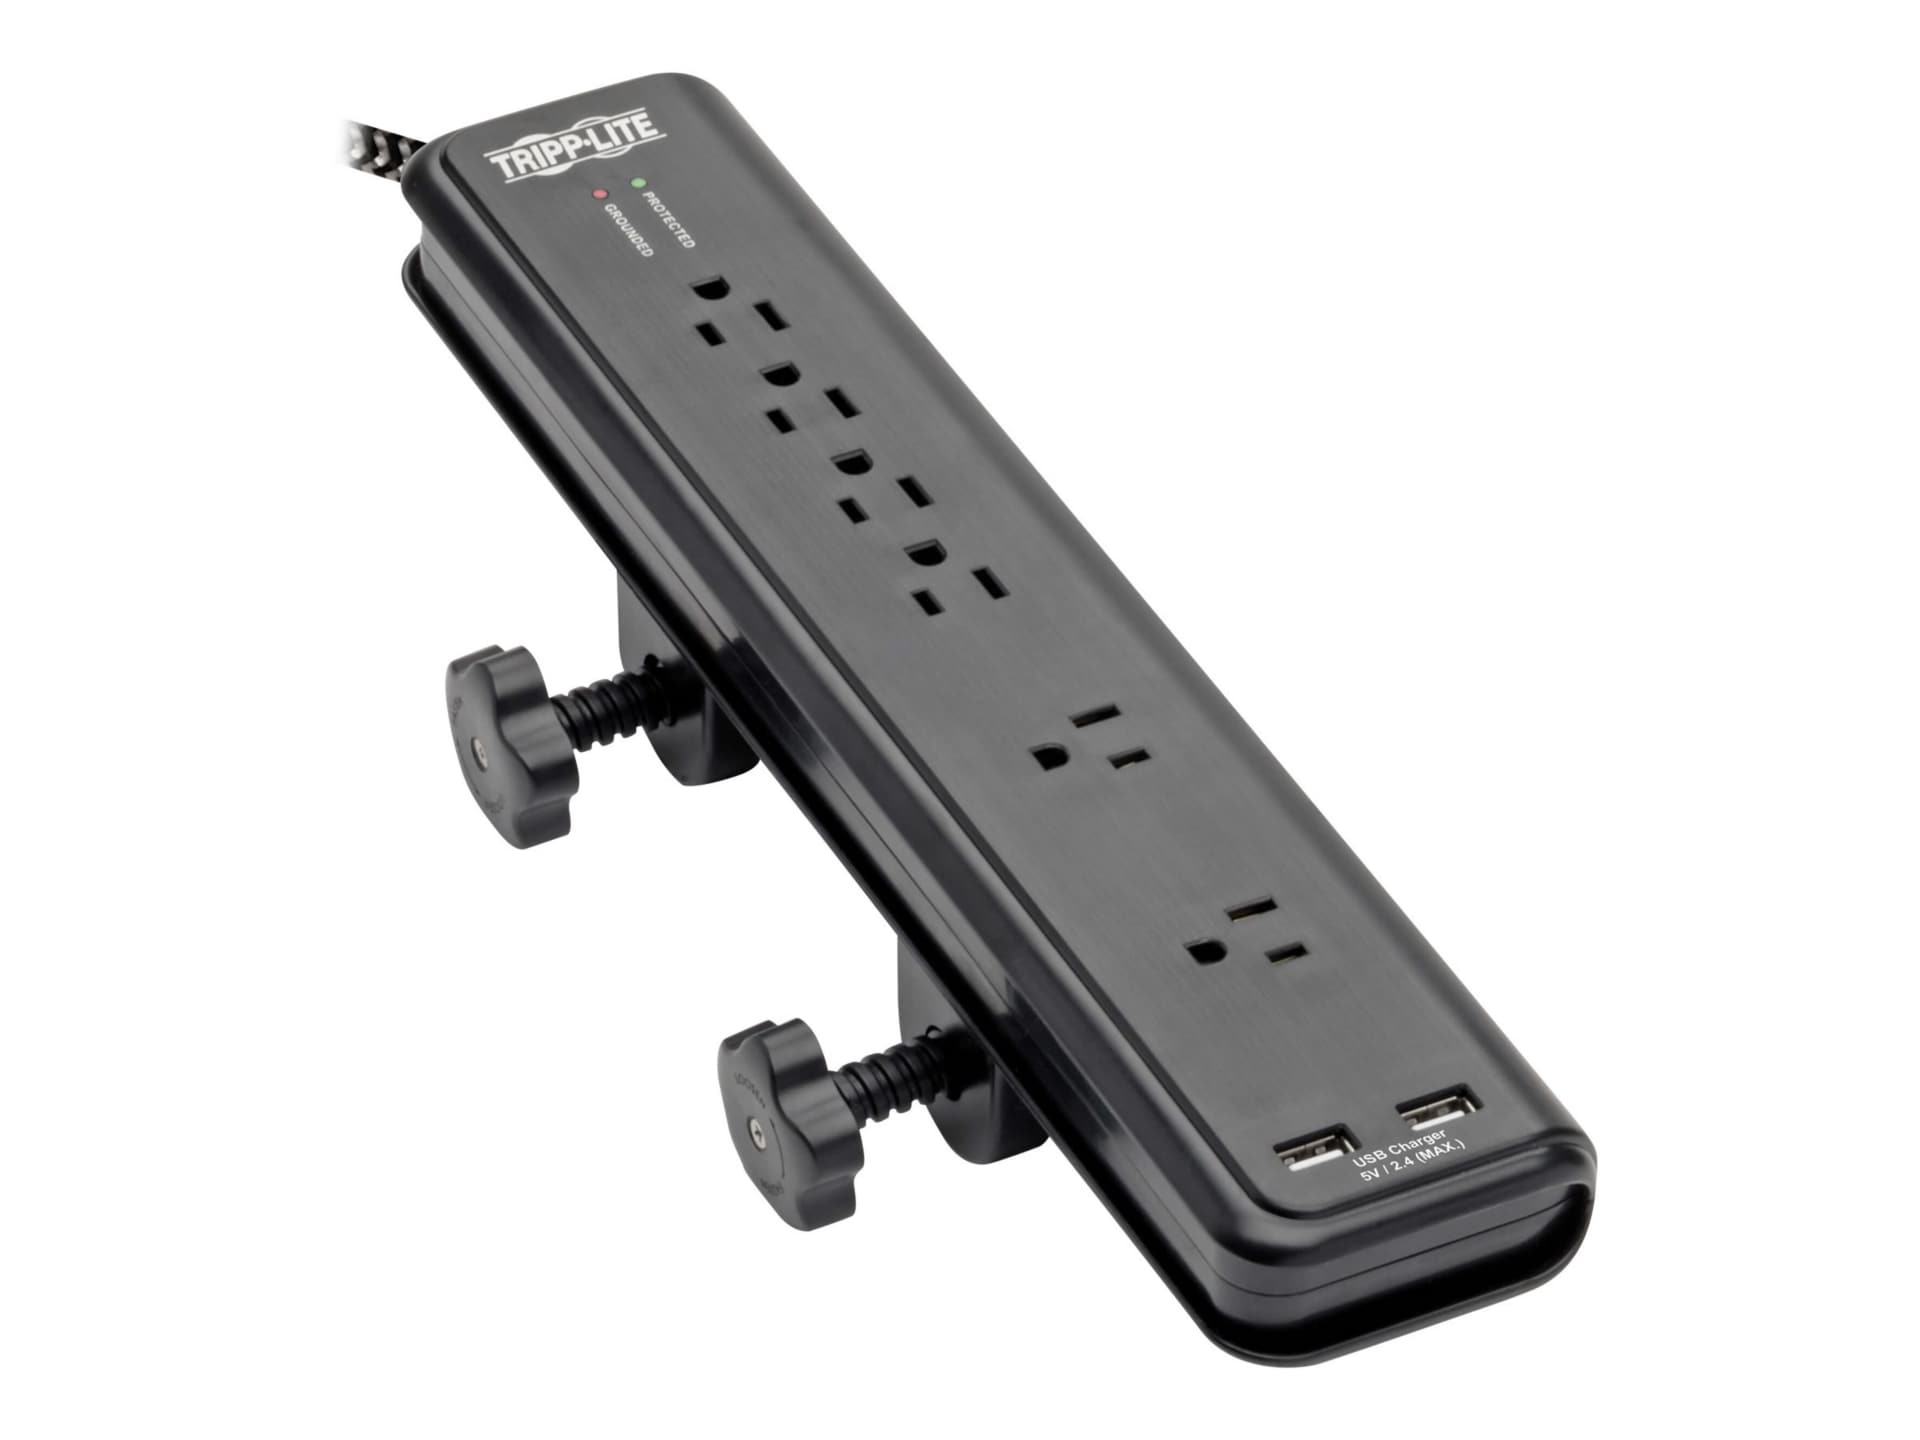 Tripp Lite Safe-IT Surge Protector - 6-Outlet 2 USB Ports, 8 ft. Cord, 5-15P Plug, 2100 Joules, Antimicrobial